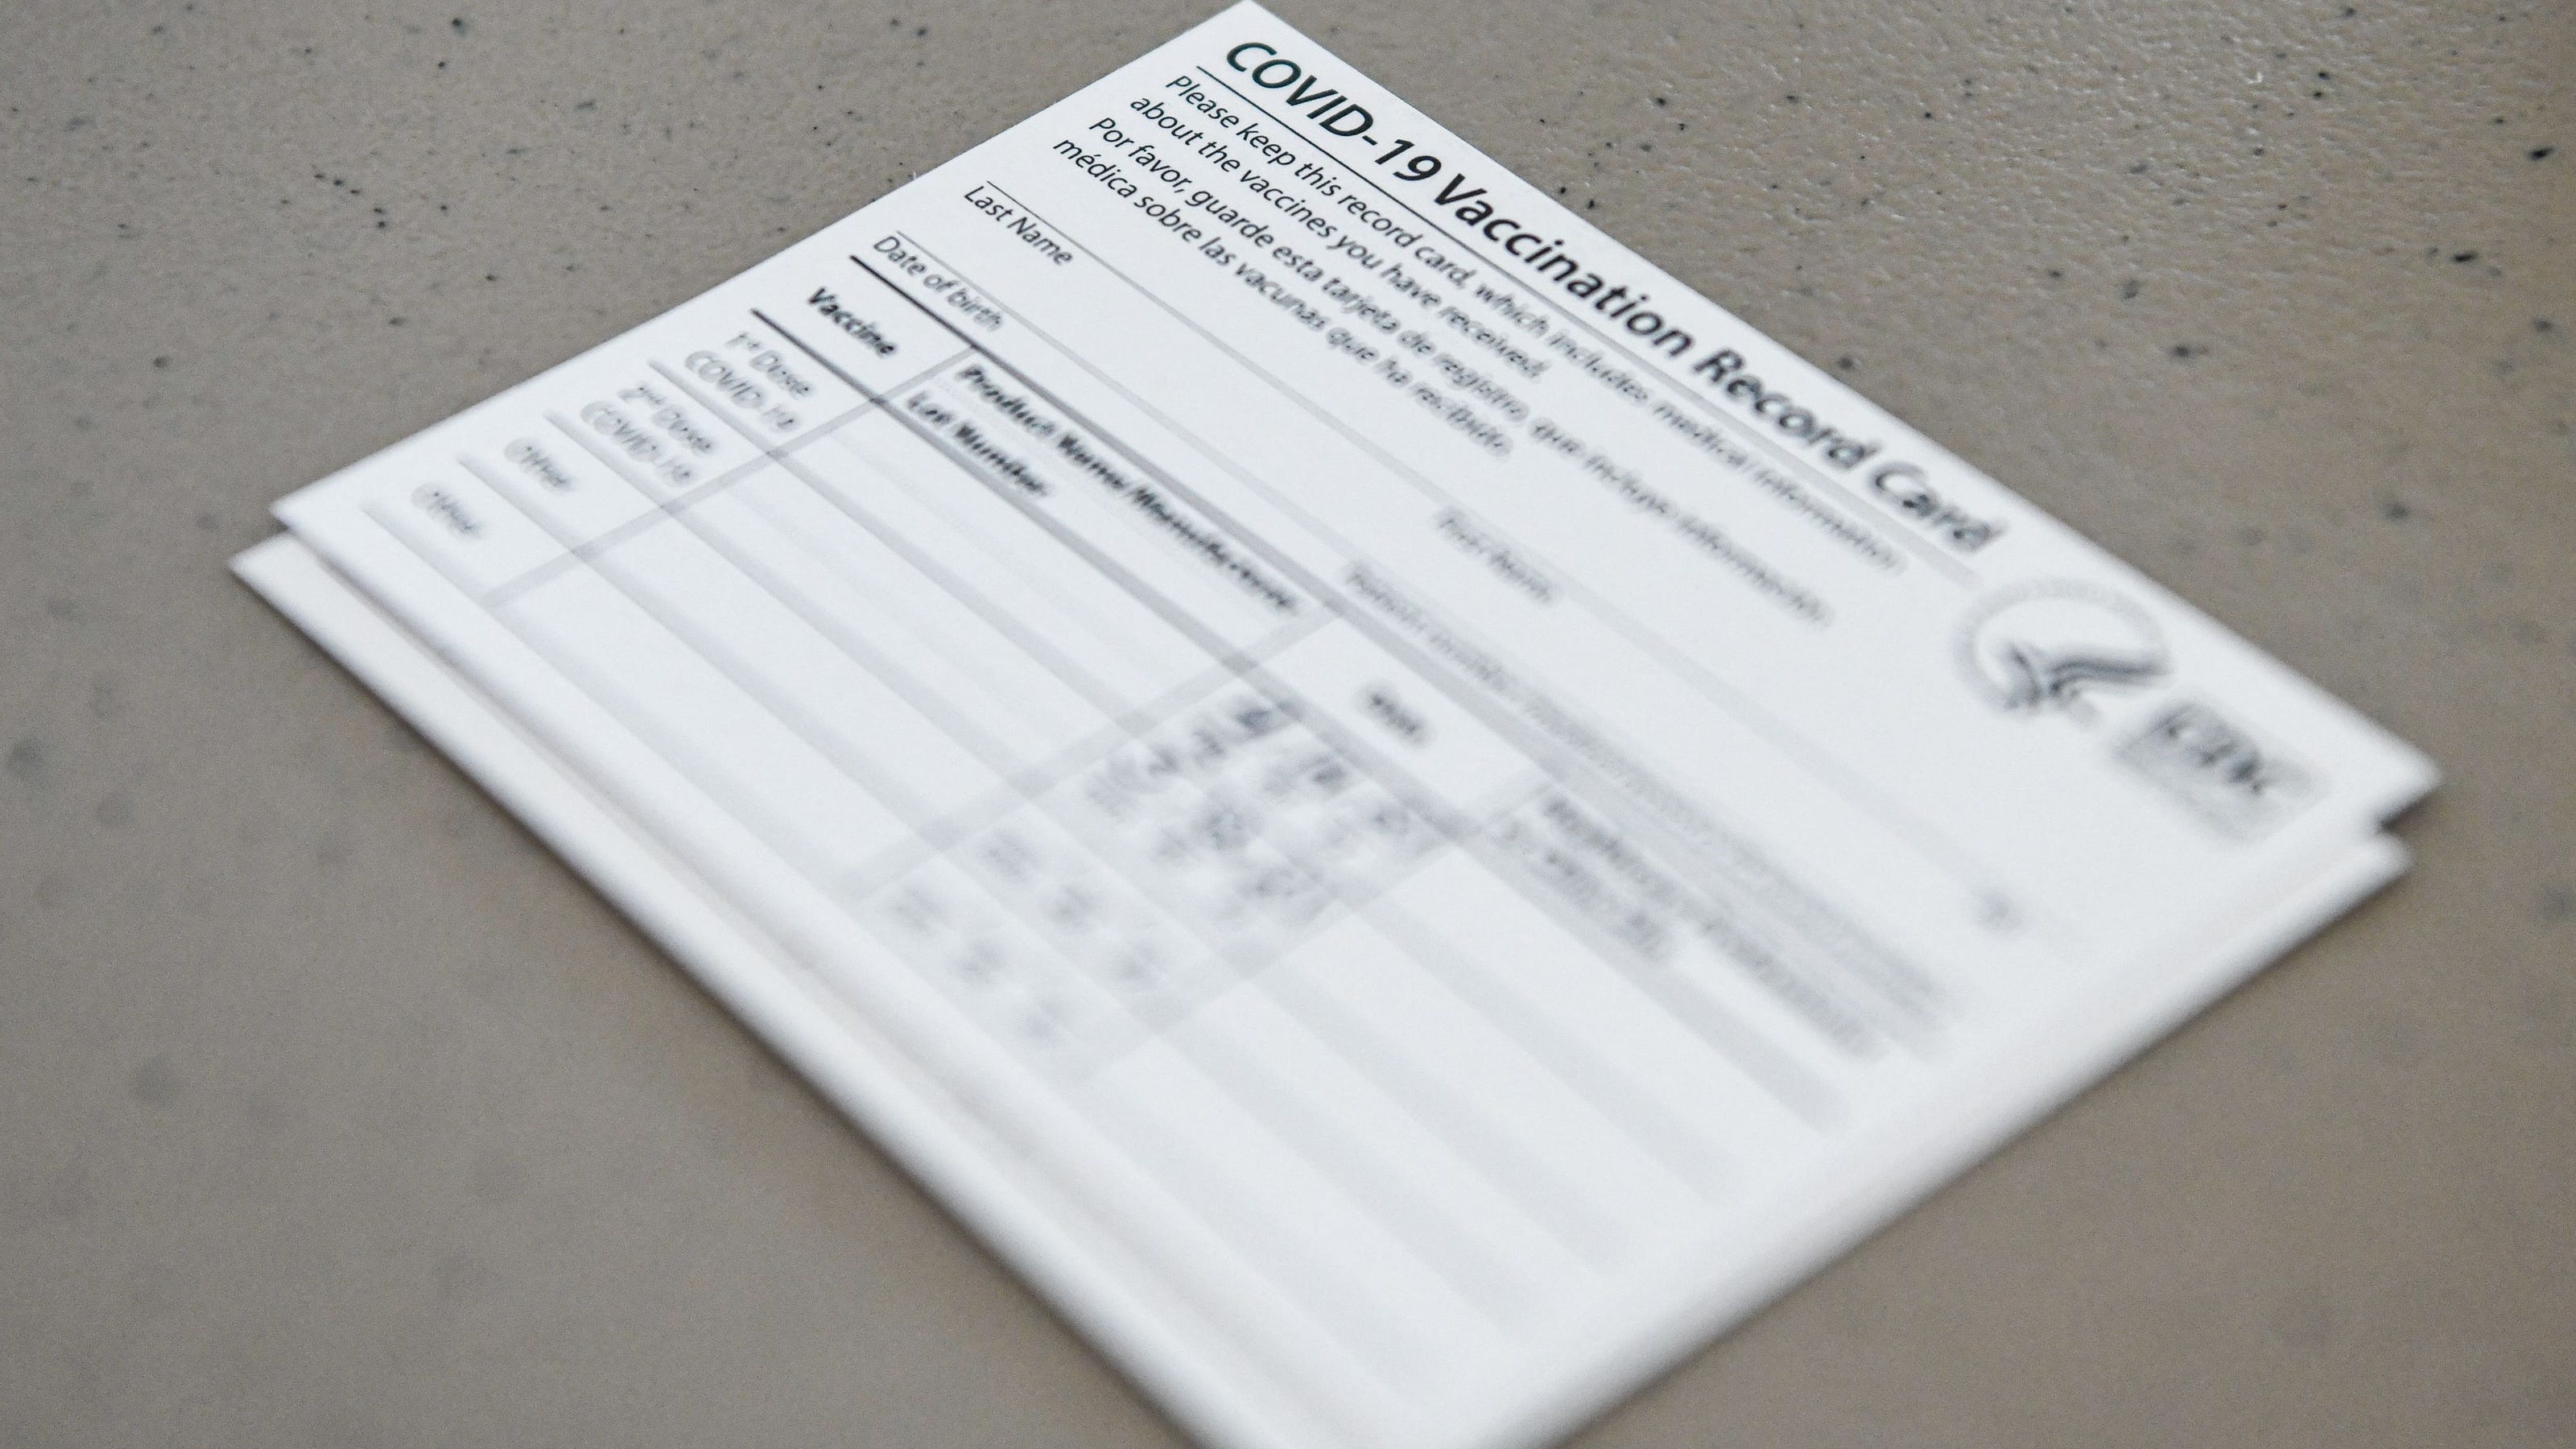 Lost your COVID vaccine card? CVS and health departments have backups